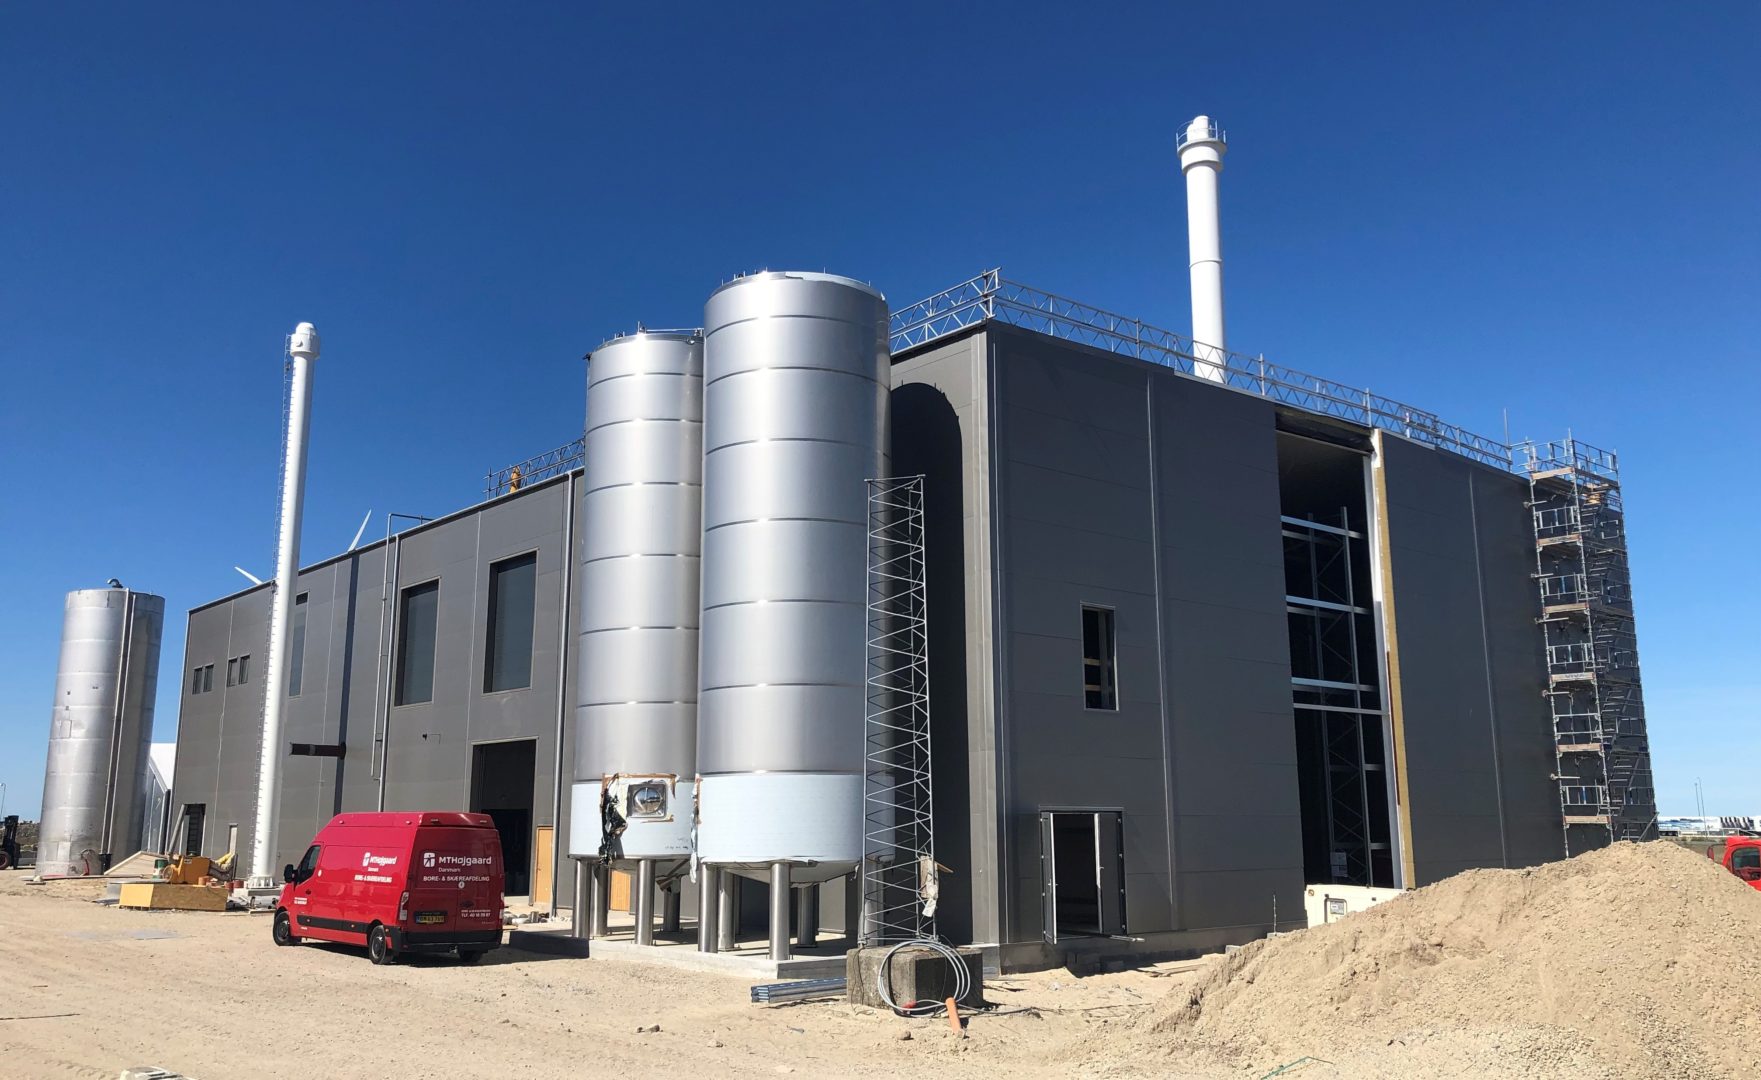 From farm to functional innovations at the Hirtshals biomega® biorefinery